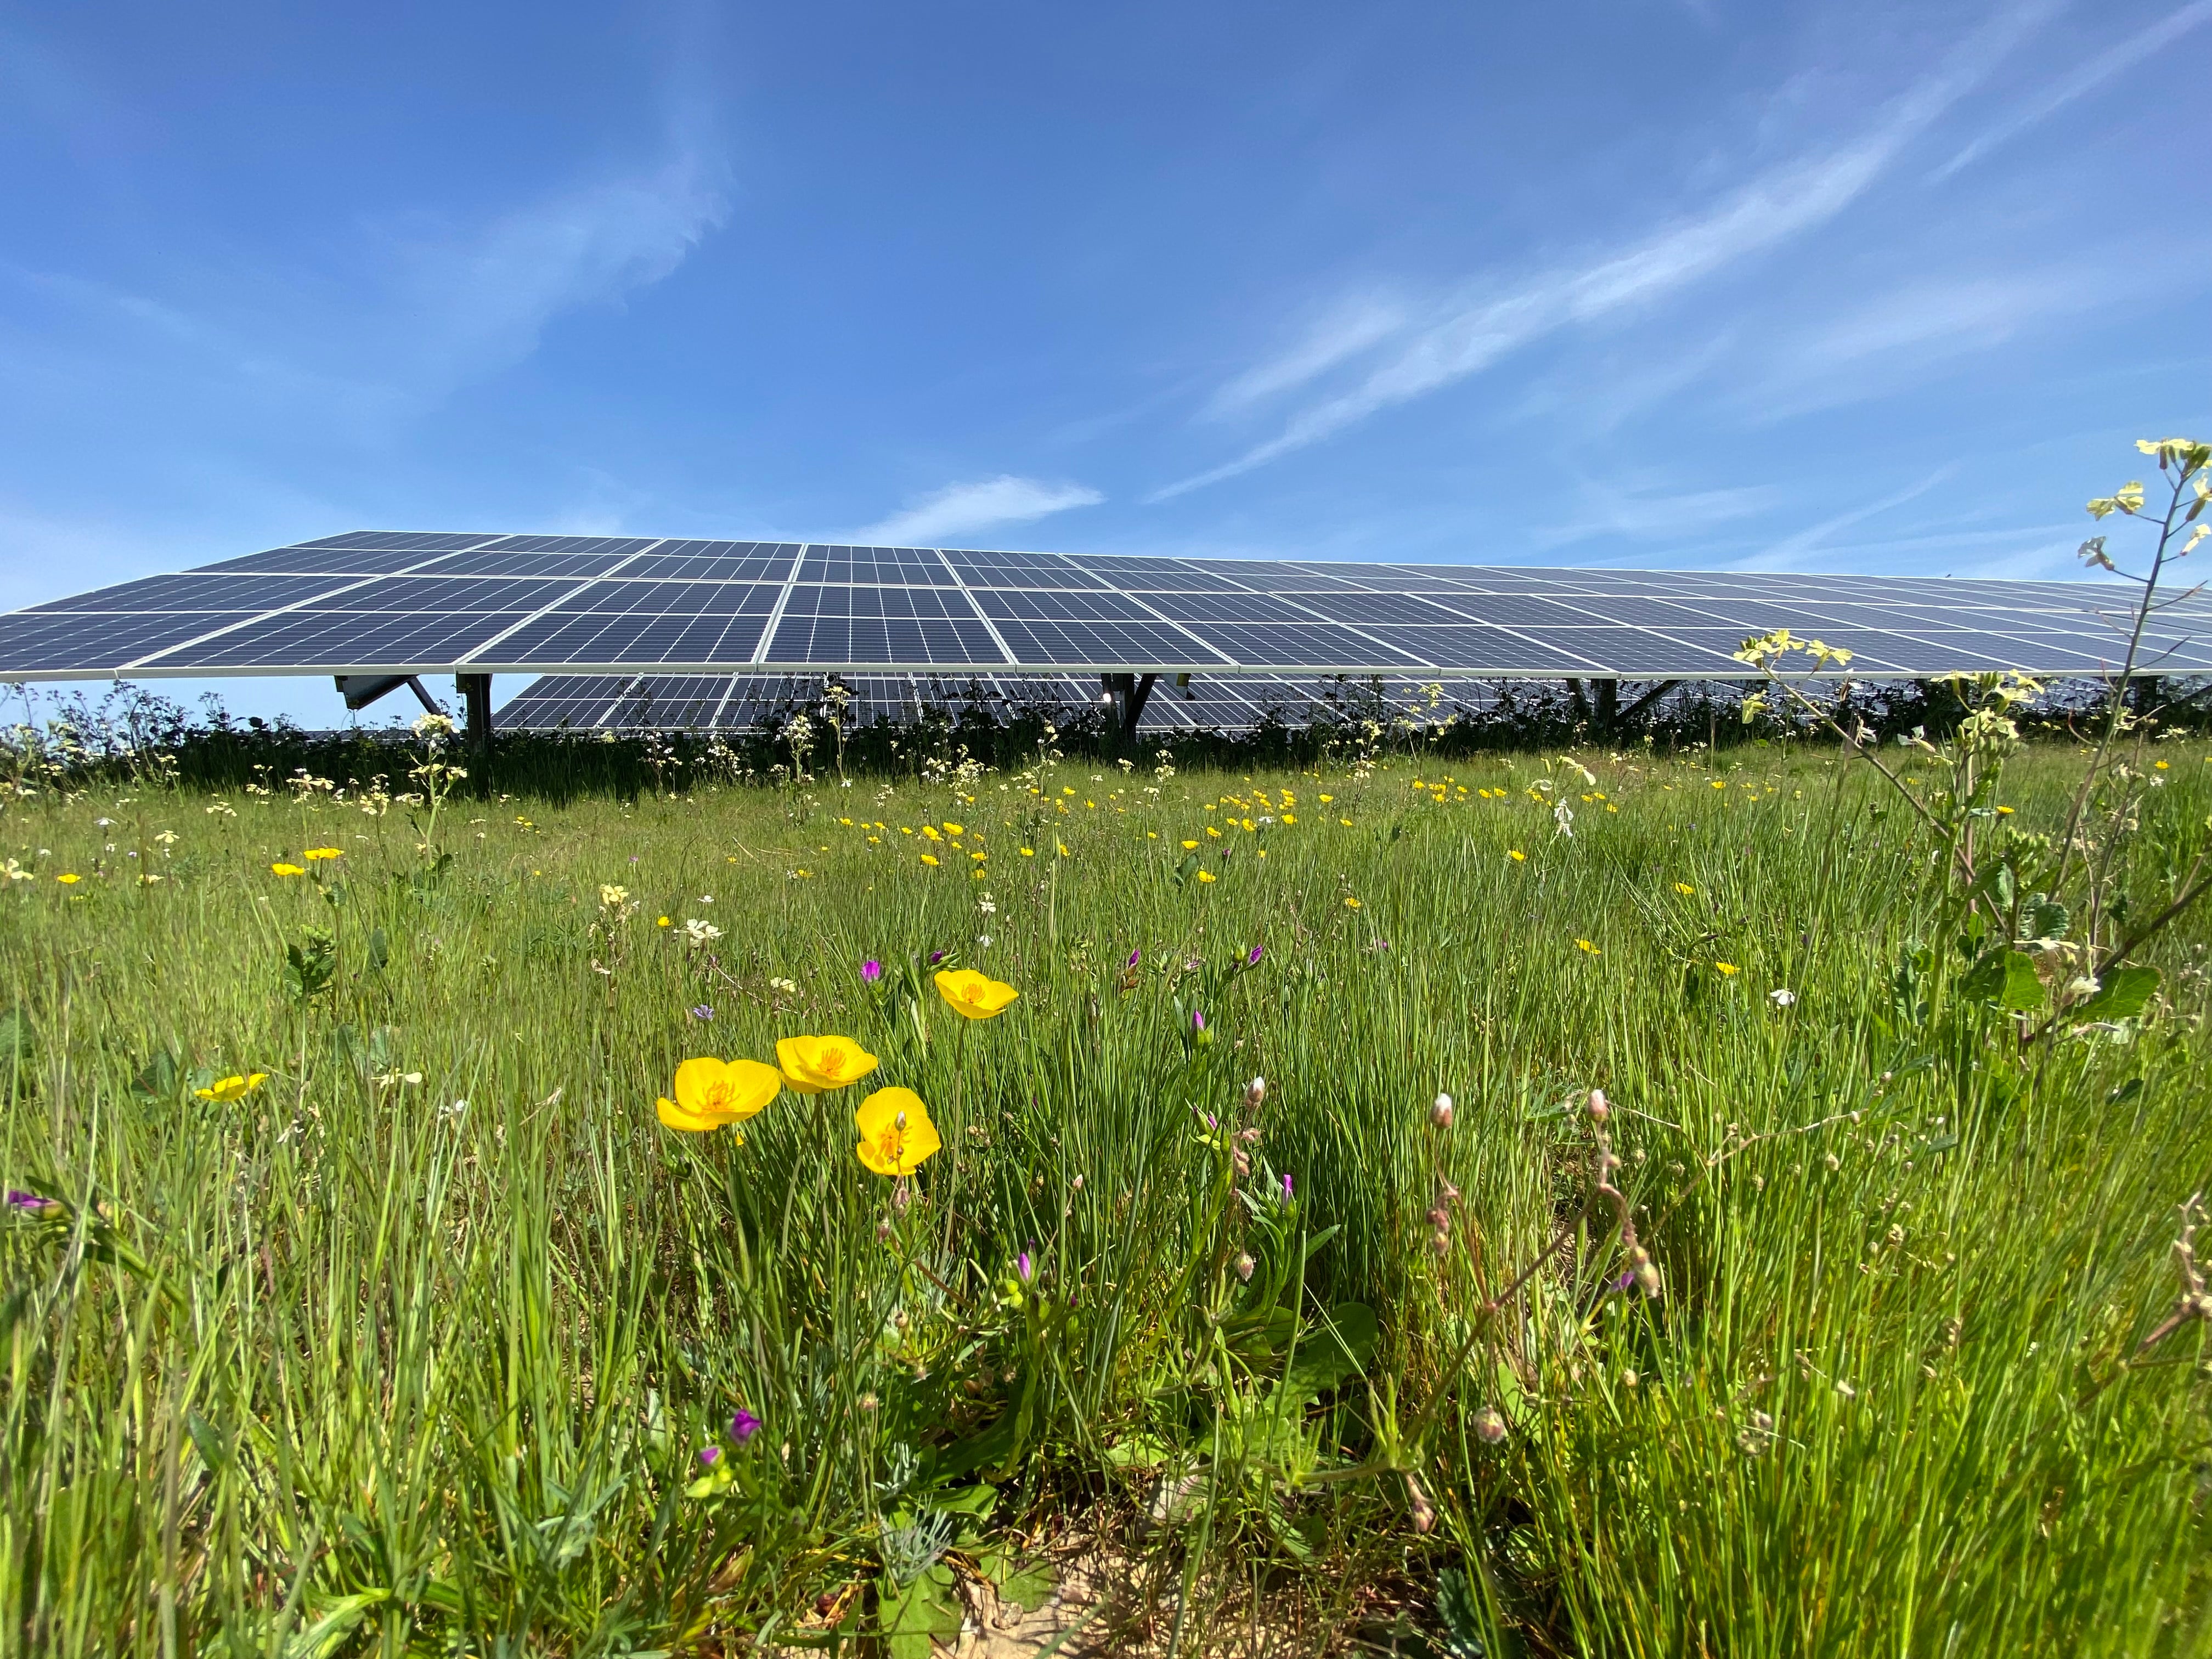 yellow ranunuls blossoms in foreground with solar panels in field in background